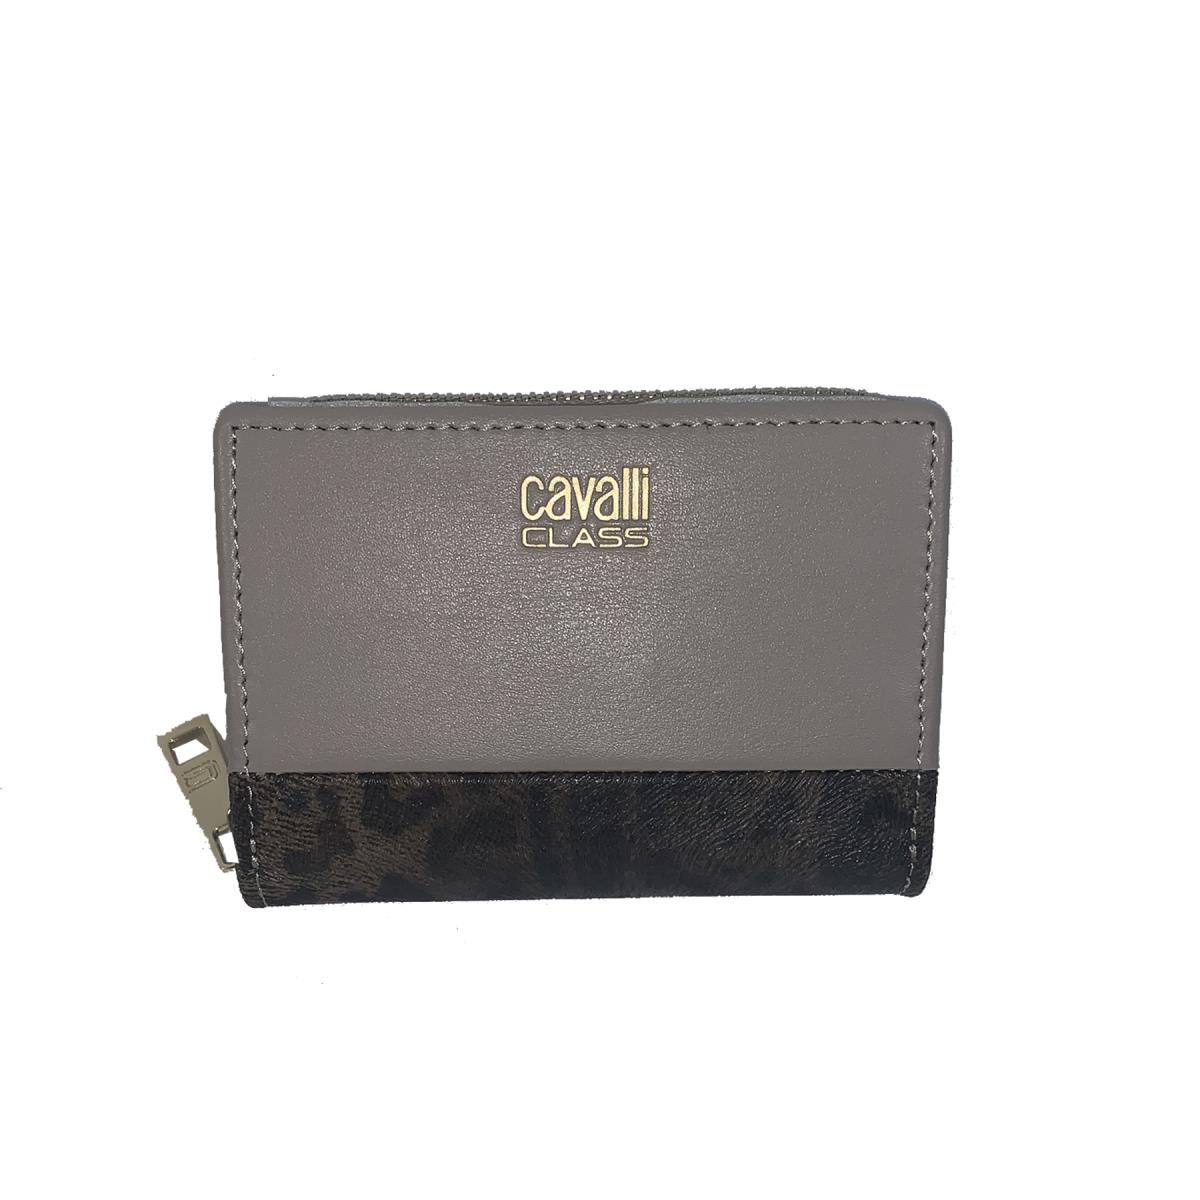 Roberto Cavalli Candy Leopard Wallet Taupe